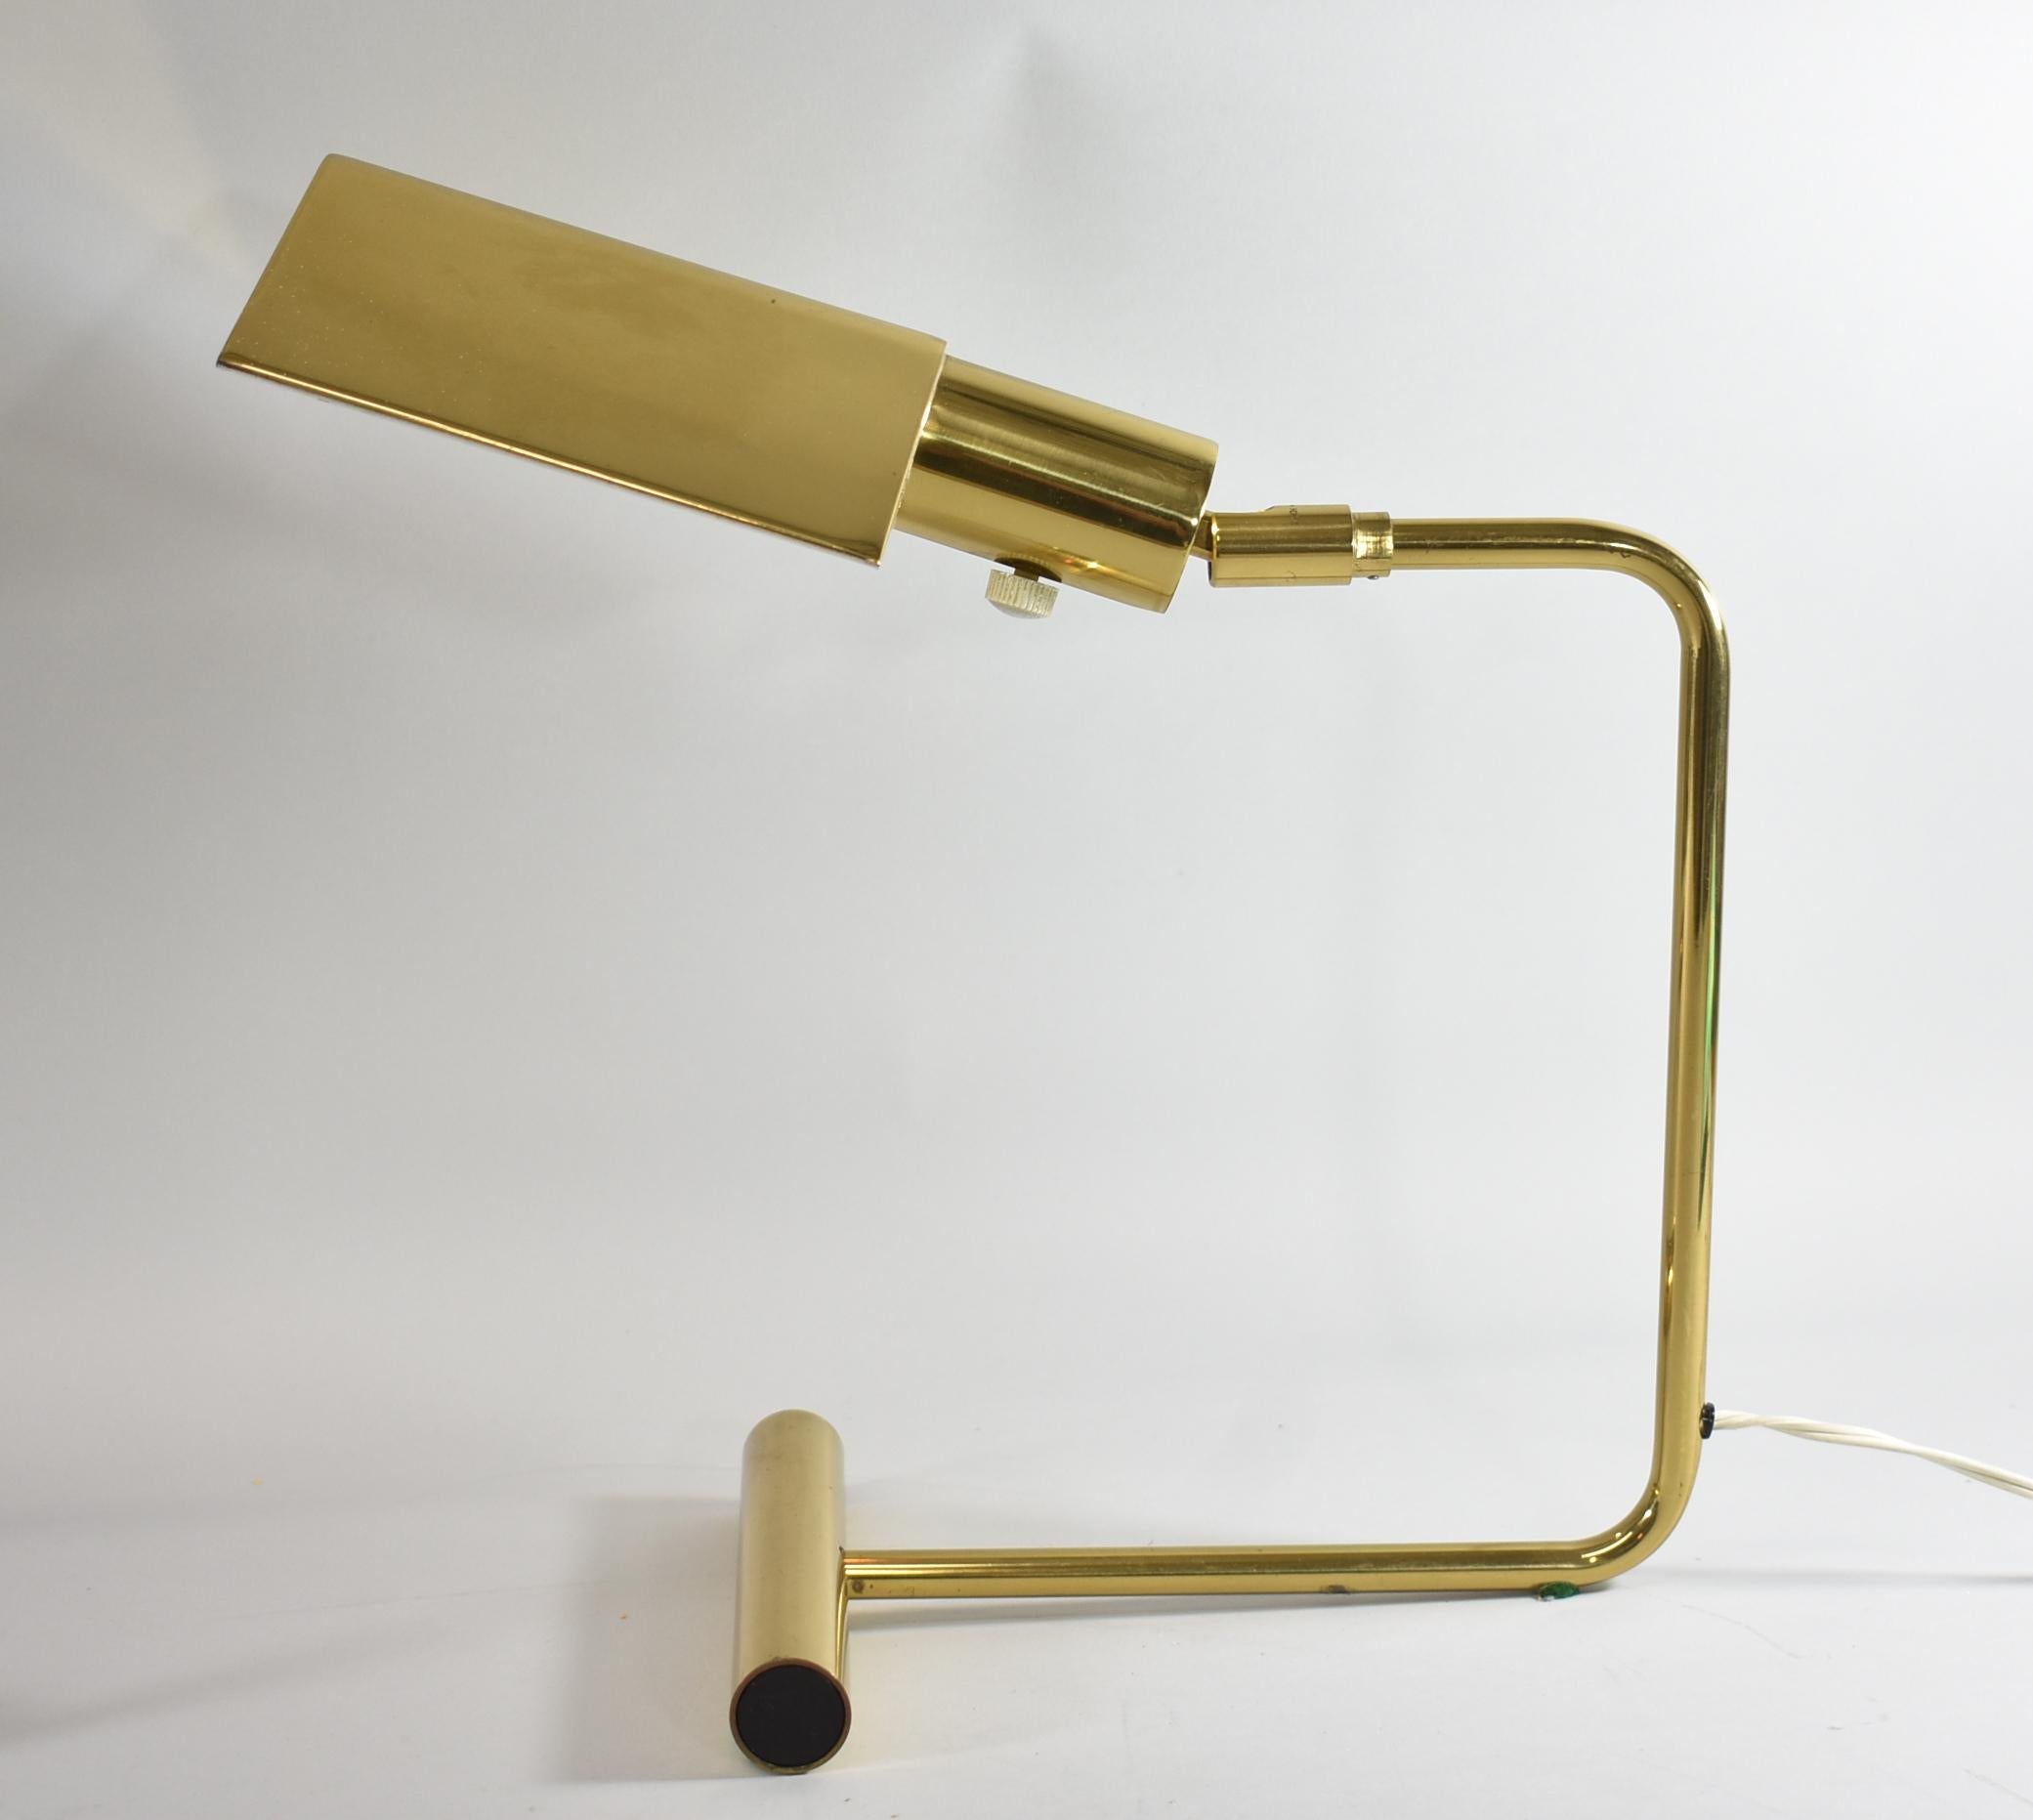 Mid-Century Modern desk lamp by Koch & Lowy, circa 1960s. Tent shade, base and shaft are made of brass. Shade adjusts.